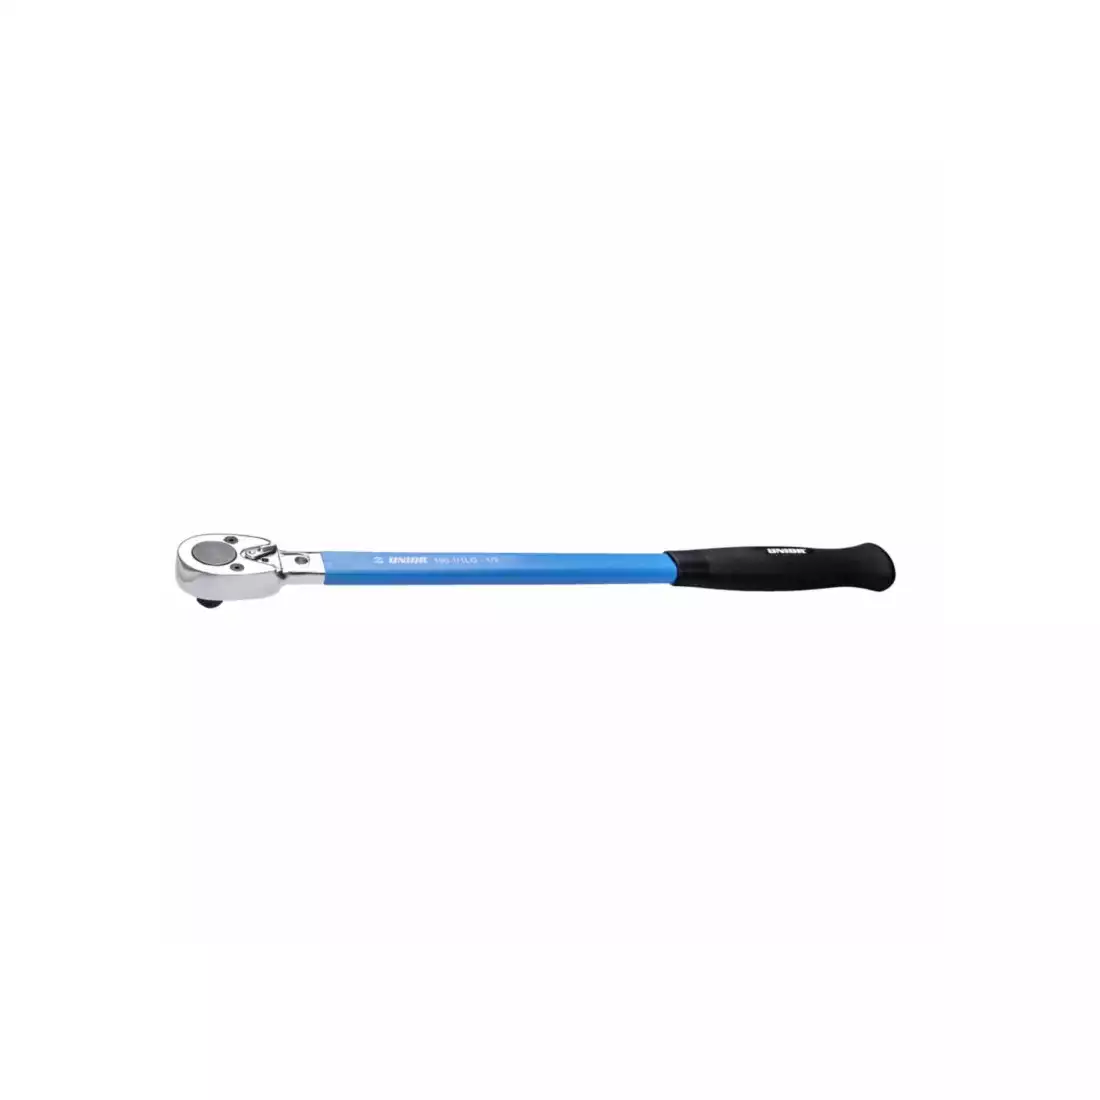 UNIOR 1/2'' reinforced ratchet wrench